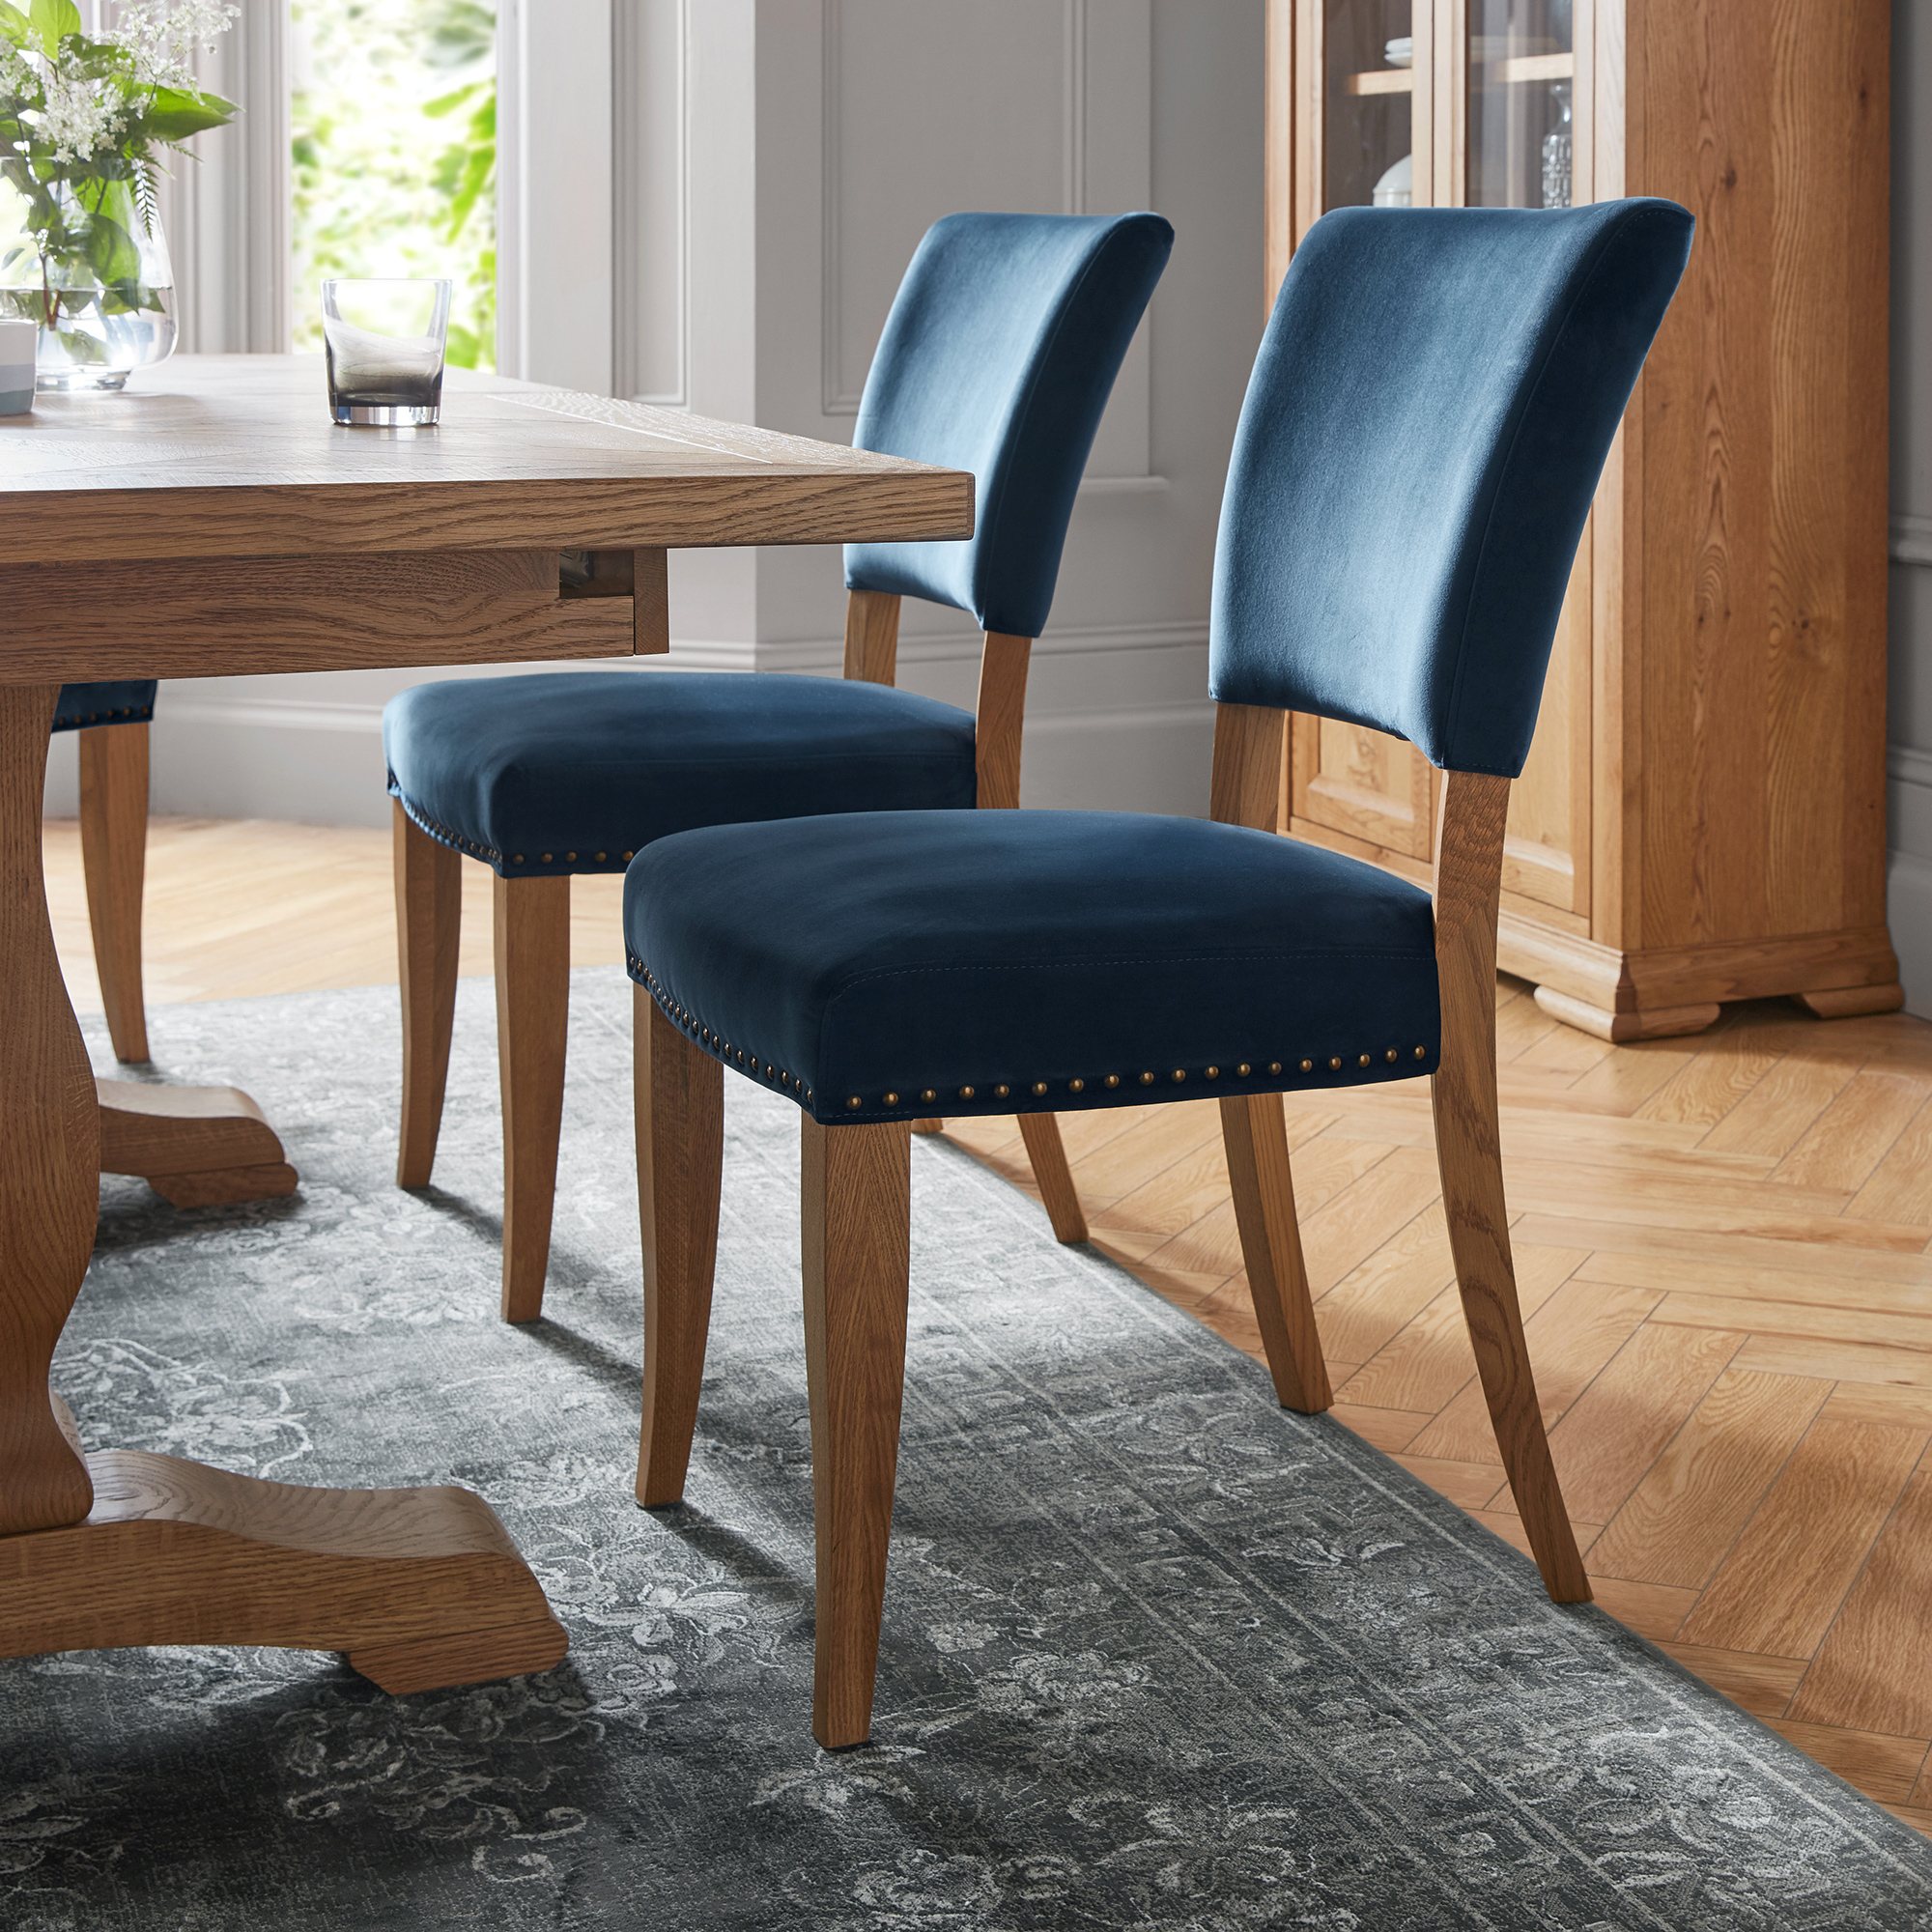  Oak Dining Room Chairs for Simple Design